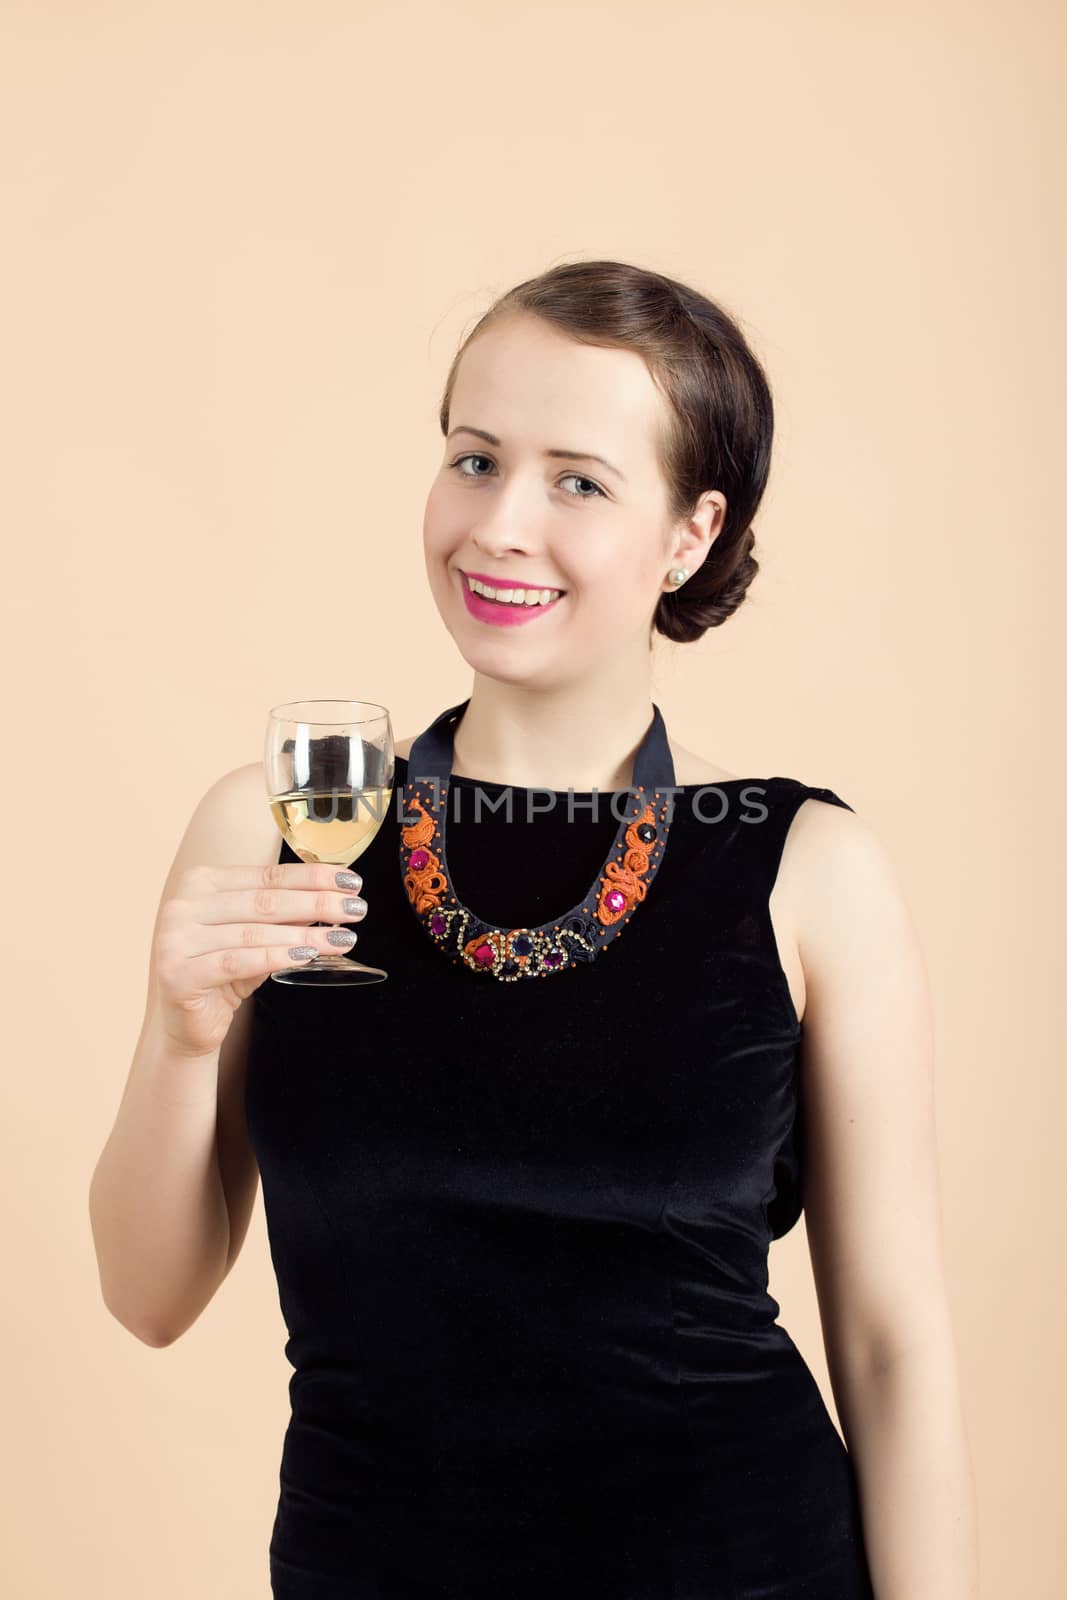 Studio portrait of smiling beautiful young brunette woman holding a glass of white wine